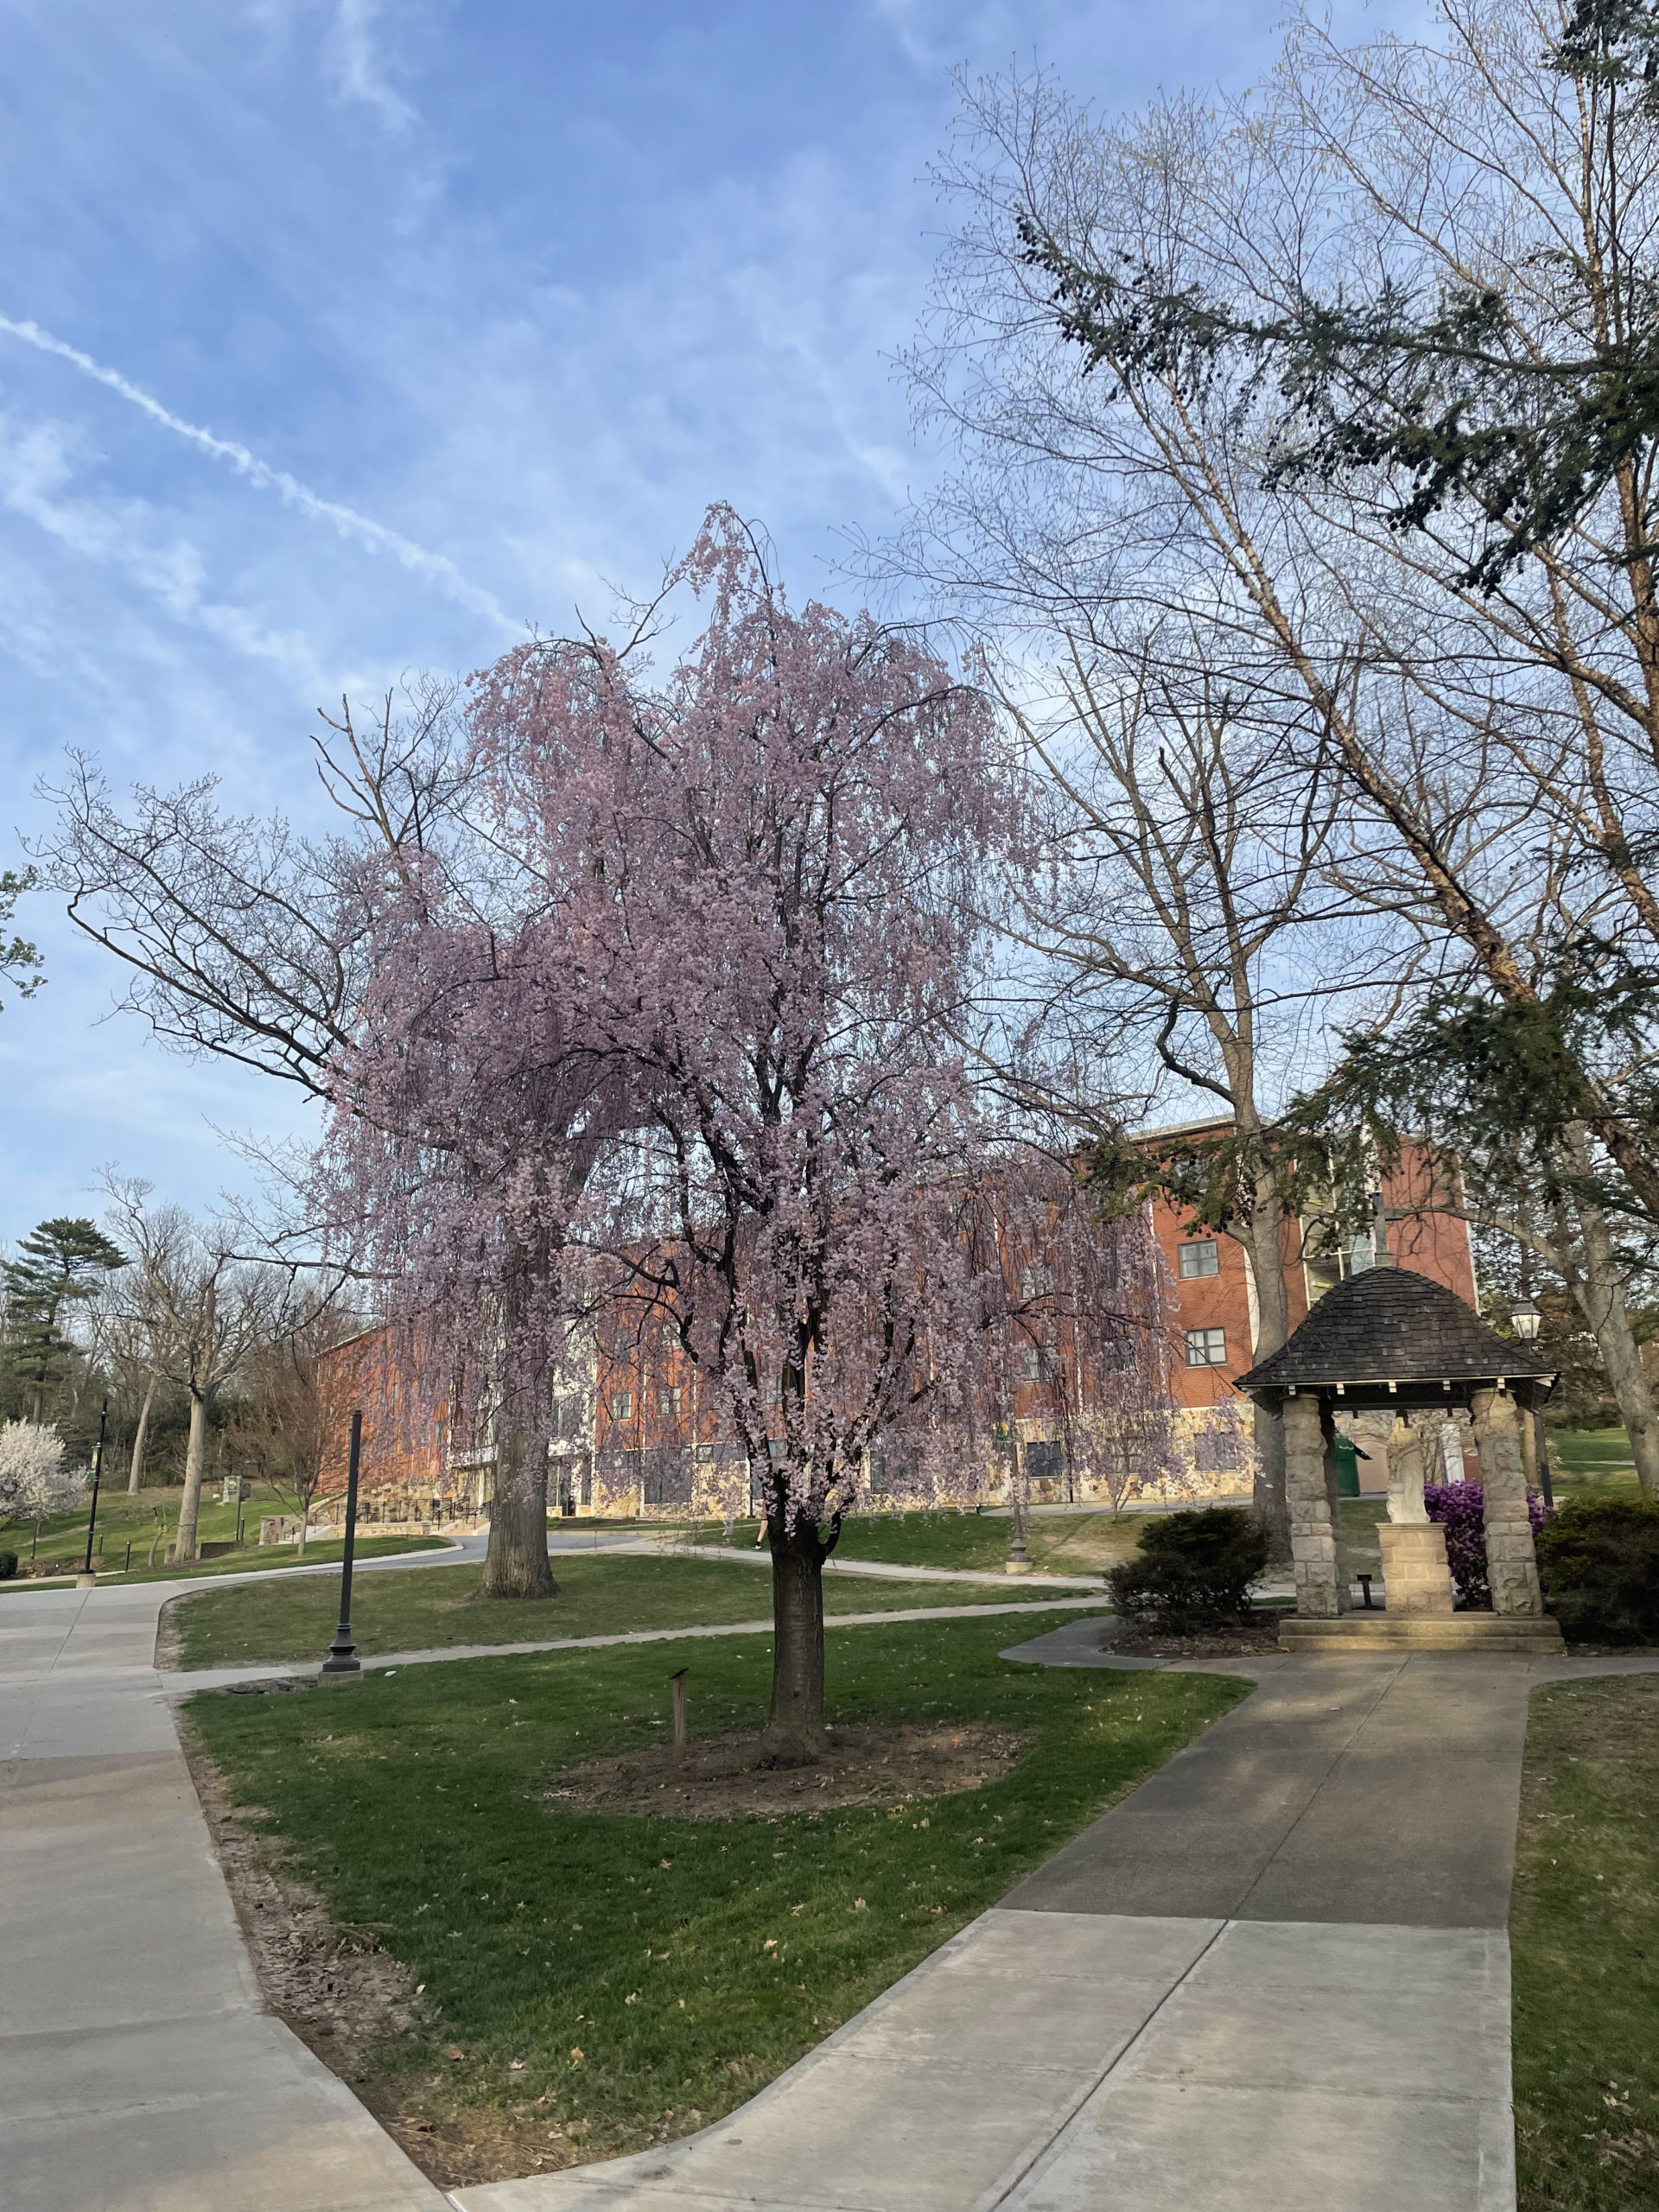 A tall Flowering Weeping Cherry Tree in between Madonna Hall and Nazareth Hall. Tree has long, down-hanging branches with small pink flowers